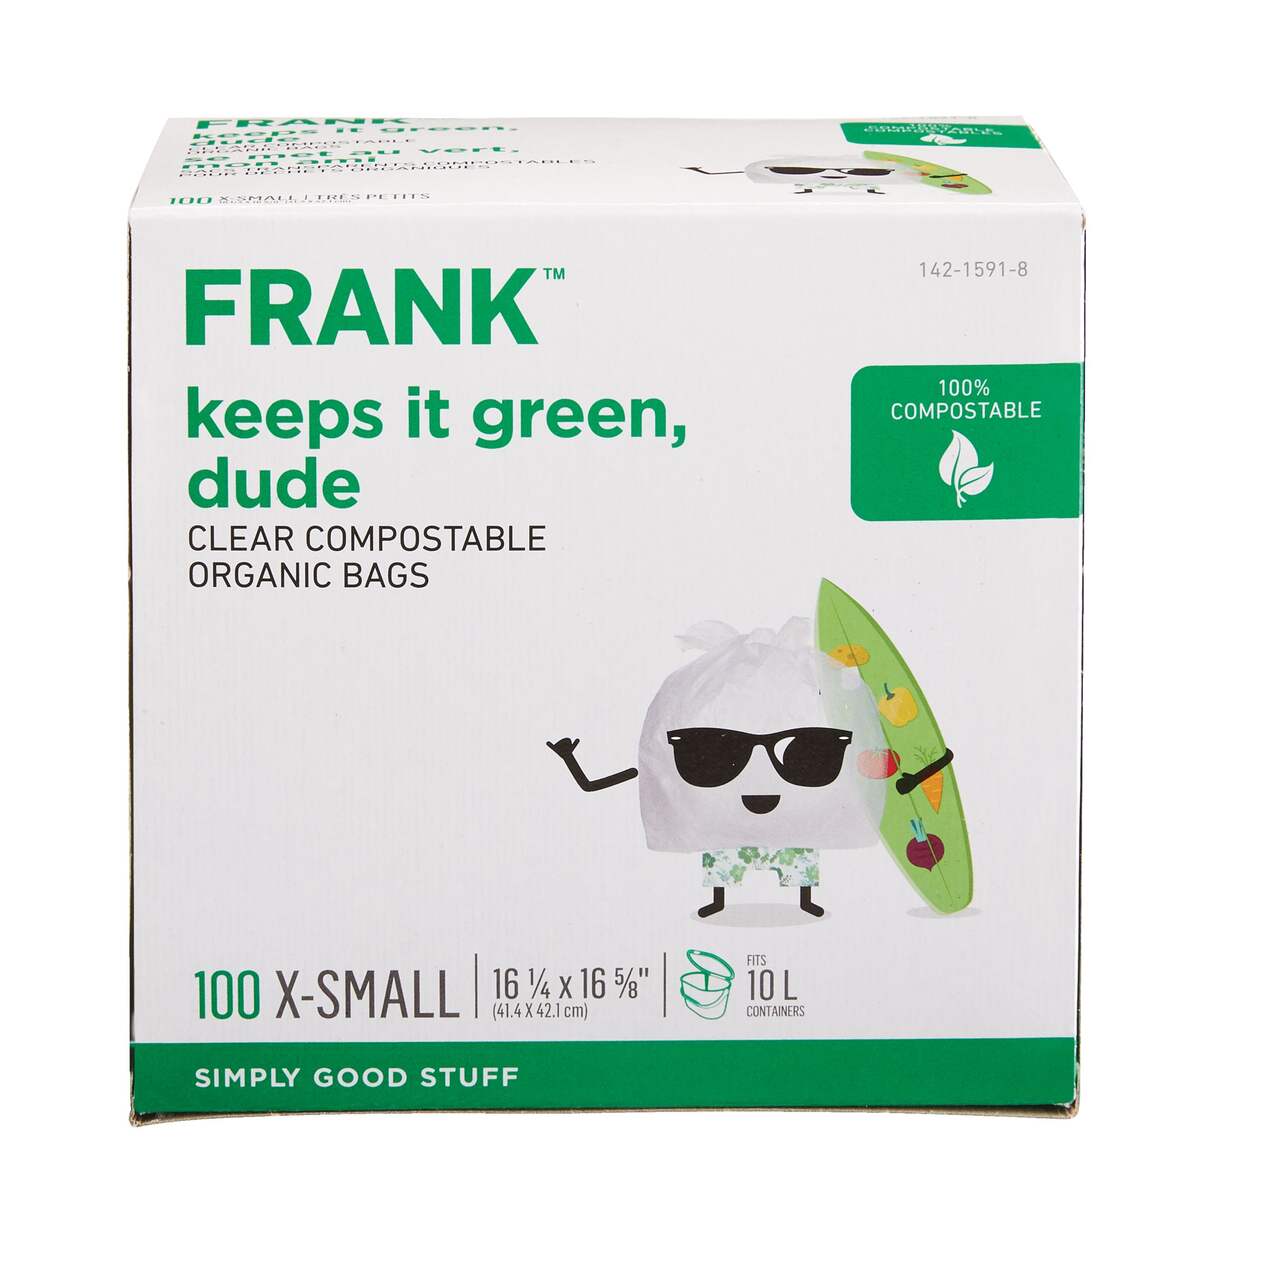 FRANK Extra-Small Organic Compostable Food Waste Bags, 100-pk